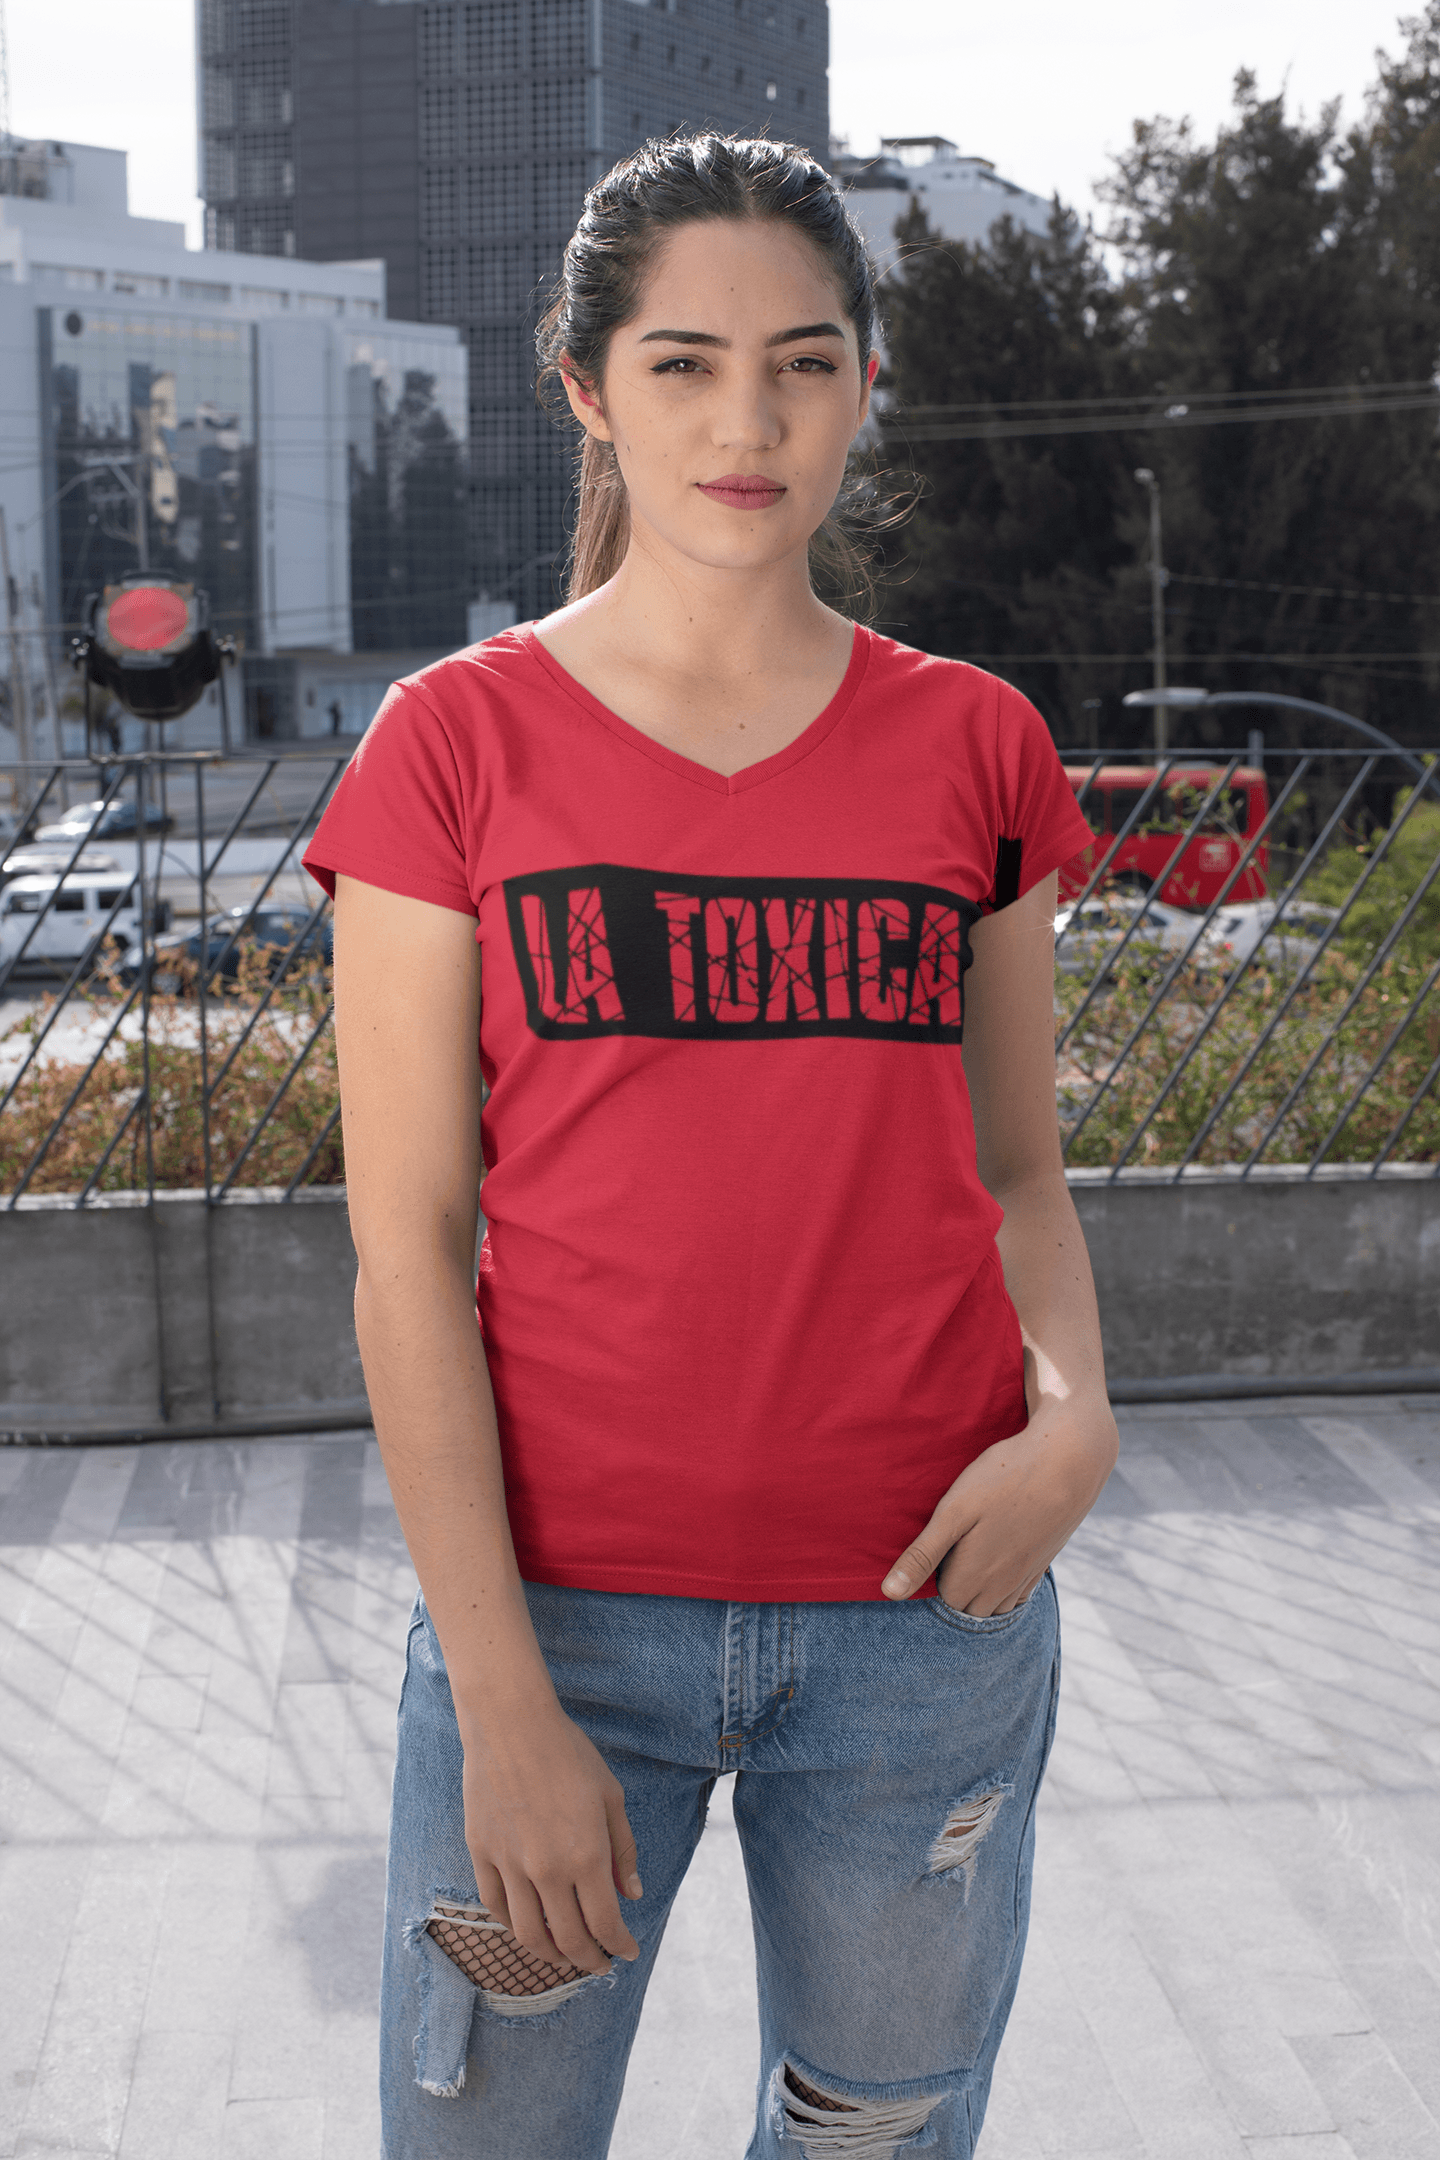 Red V-Neck Women's T-shirt with the text "La Toxica" in black ink and in a very stylish streatwear design. This t-shirt comes in sizes sm-3xl and is available at www.sanchezhere.com